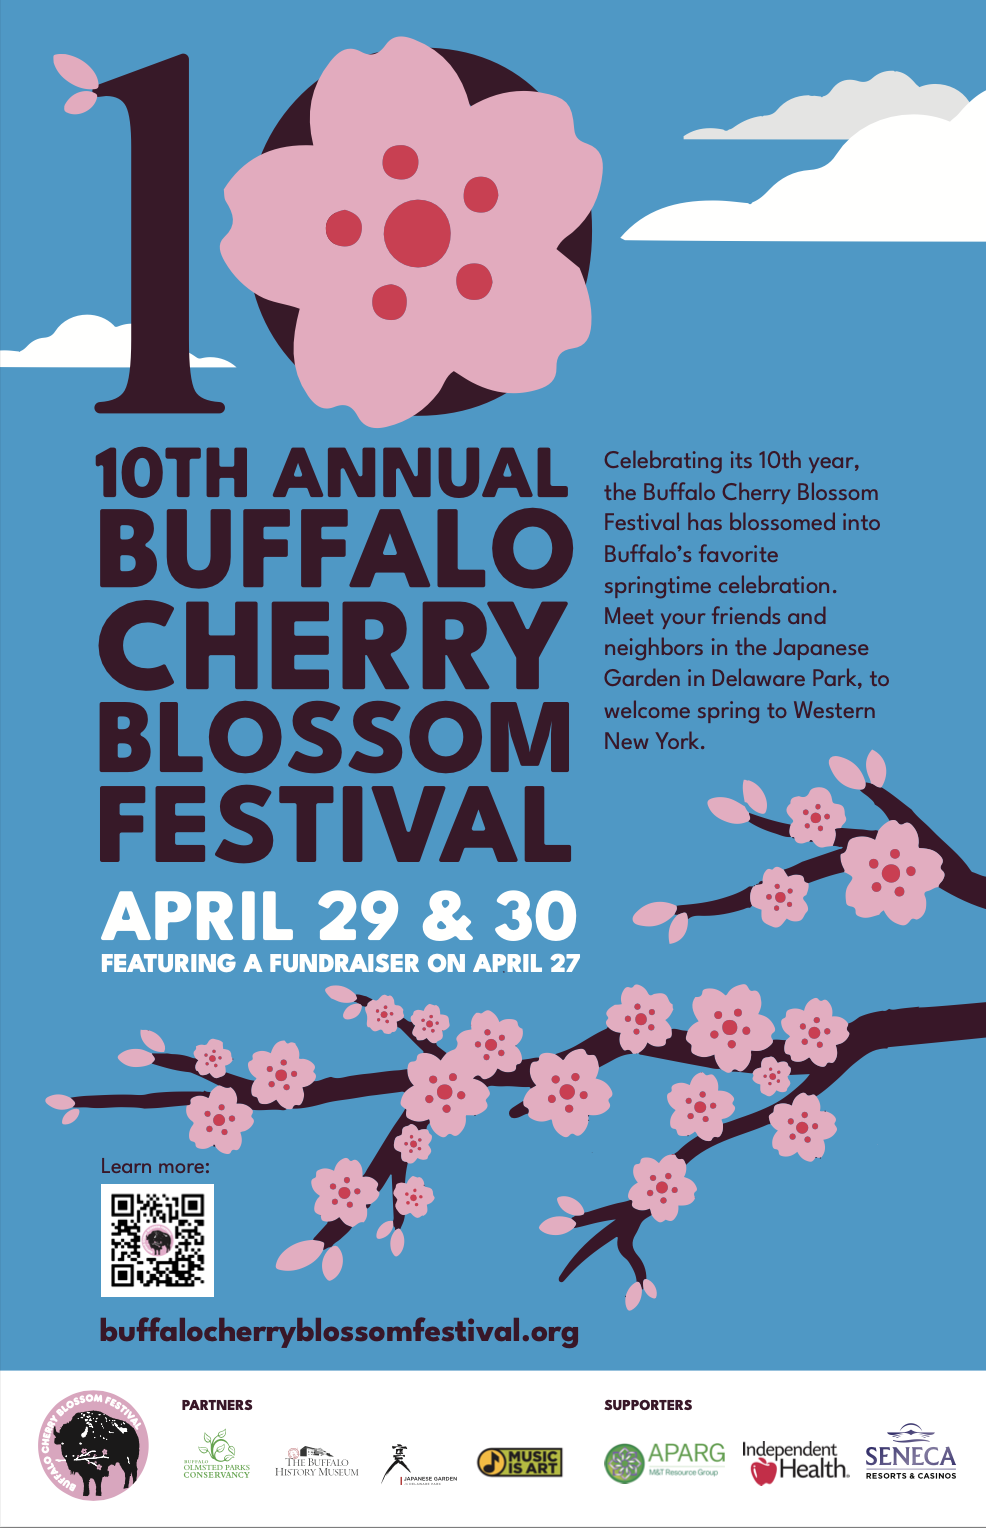 Poster for the 10th Annual Buffalo Cherry Blossom Festival April 29-30, featuring a fundraiser on April 27